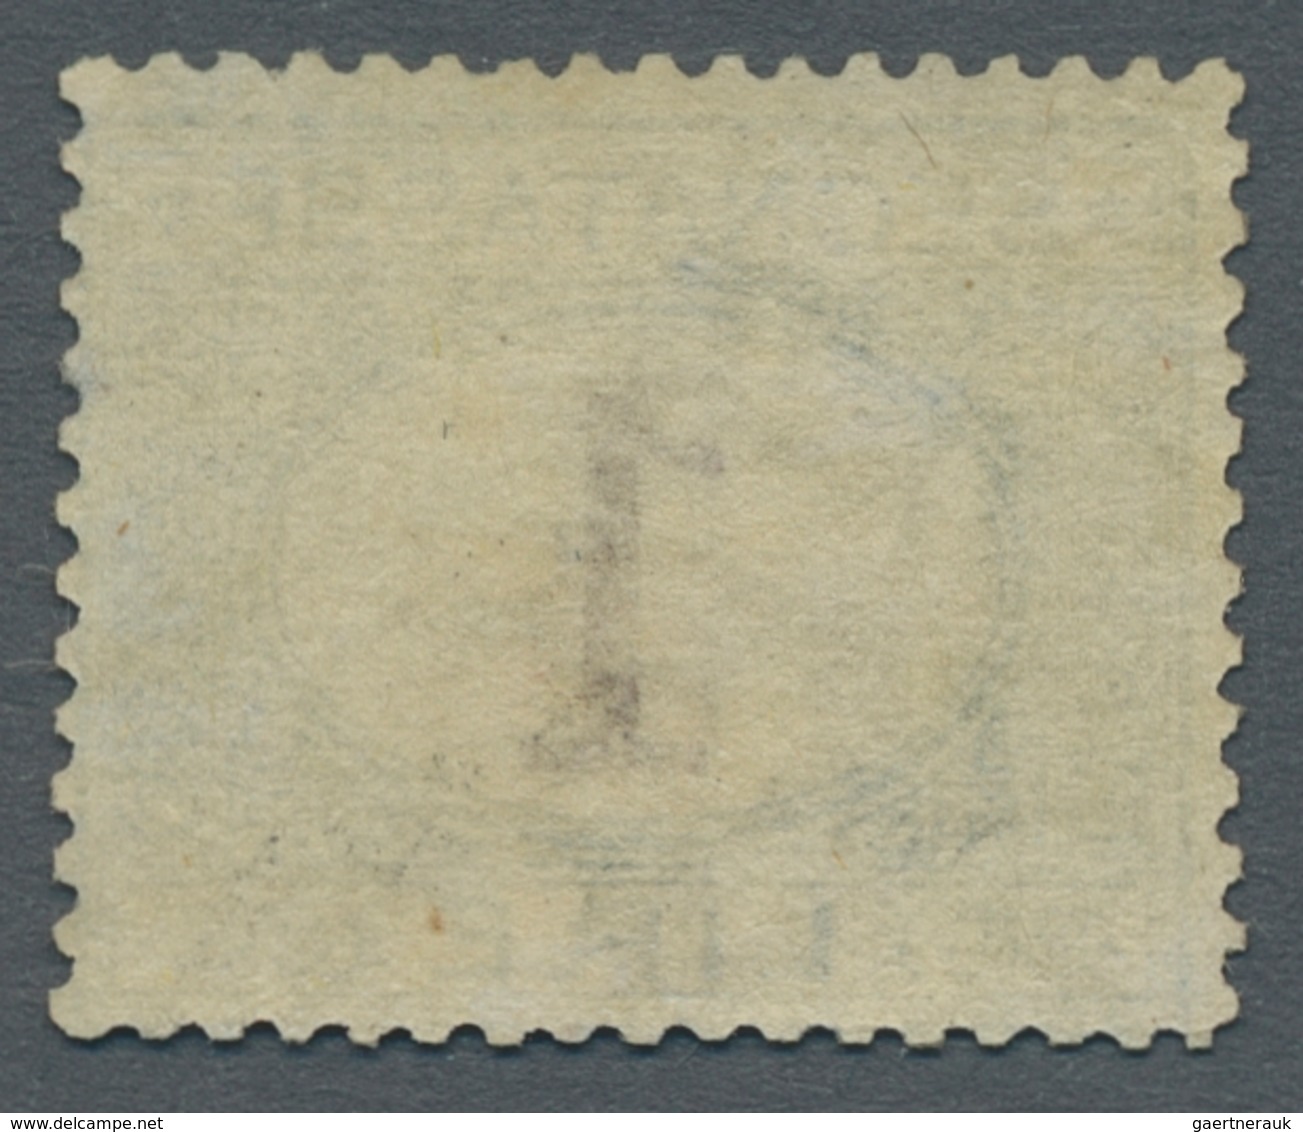 Italien - Portomarken: 1870, "1 L. Blue/brown", In Fresh Color With Above-average Perforation And Or - Strafport